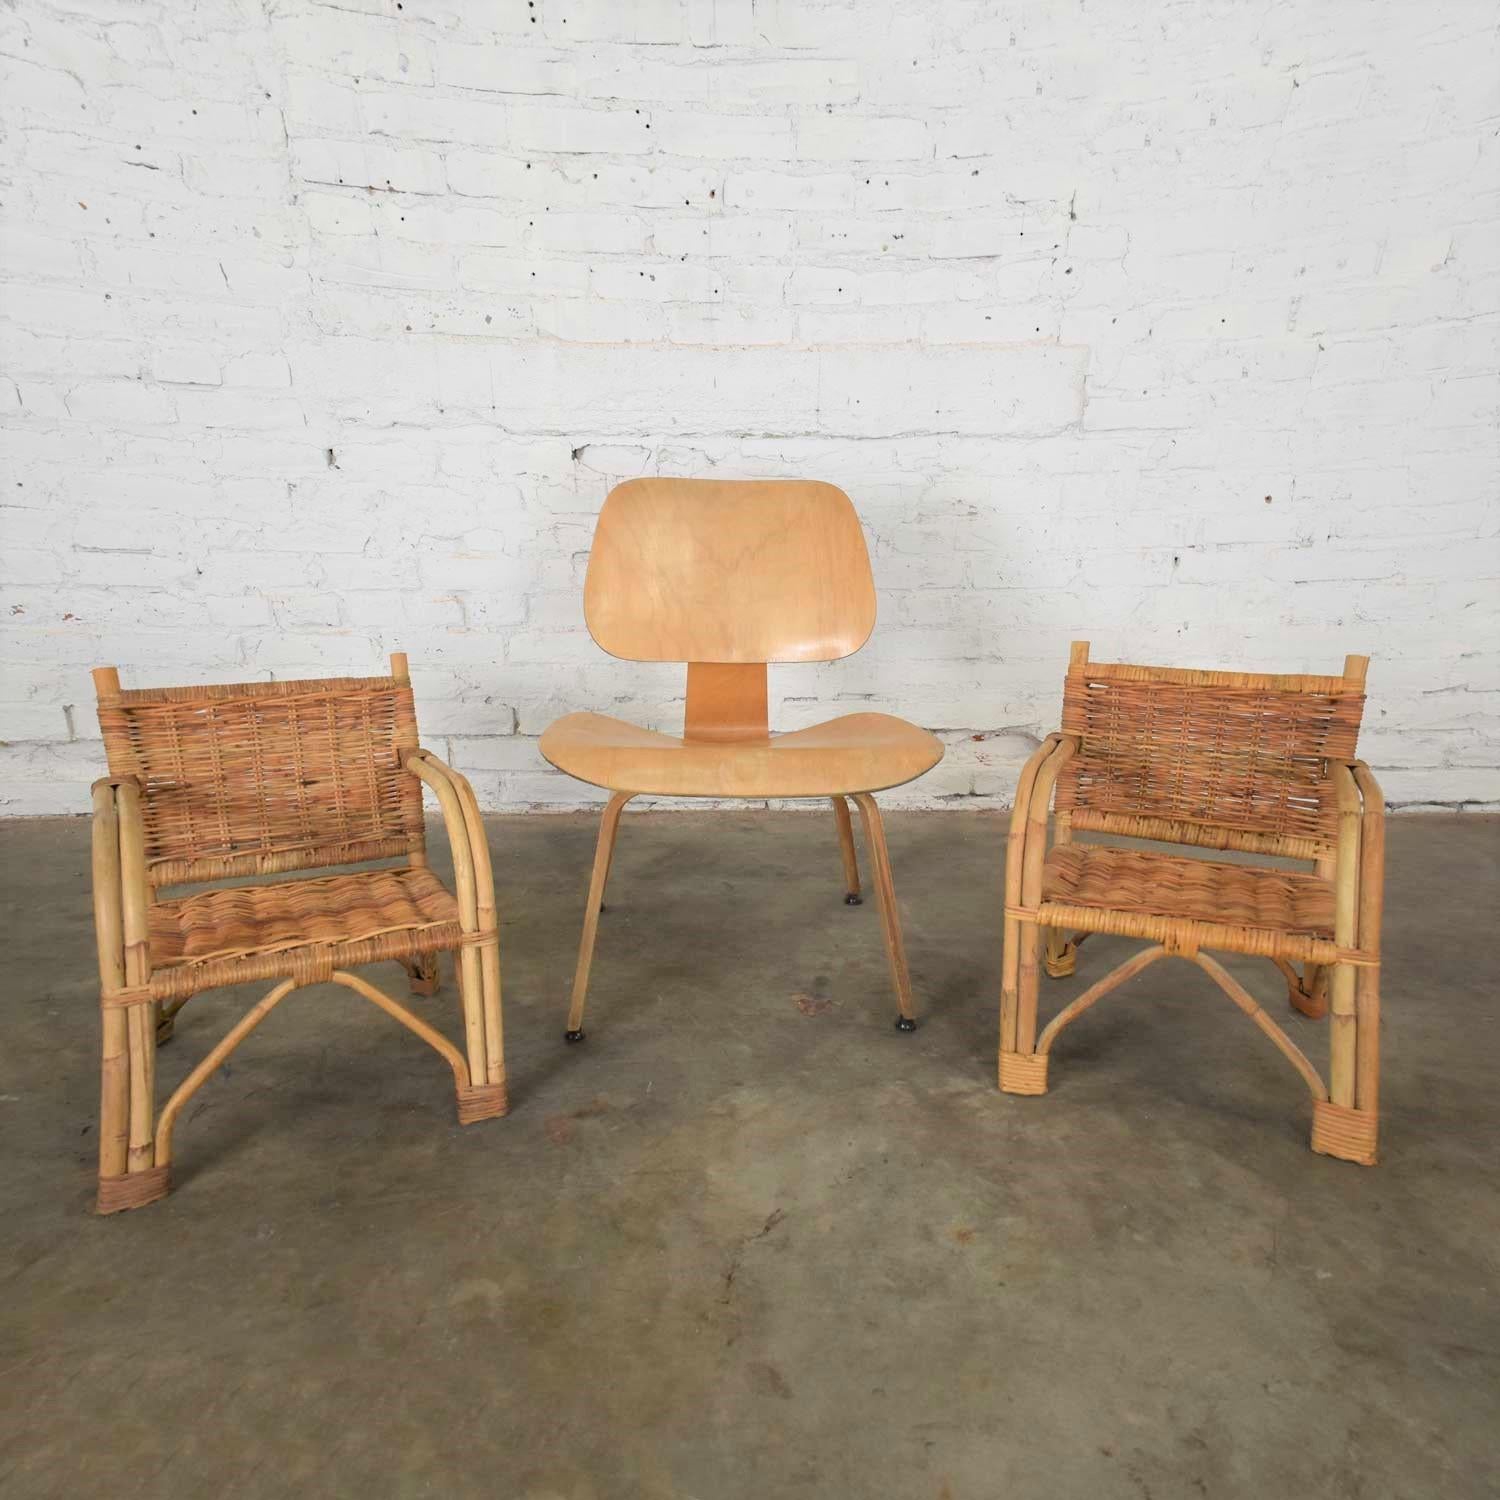 Mid-Century Modern Children’s Rattan and Wicker Chairs with Bent Arms Vintage Pair, 1930-1960